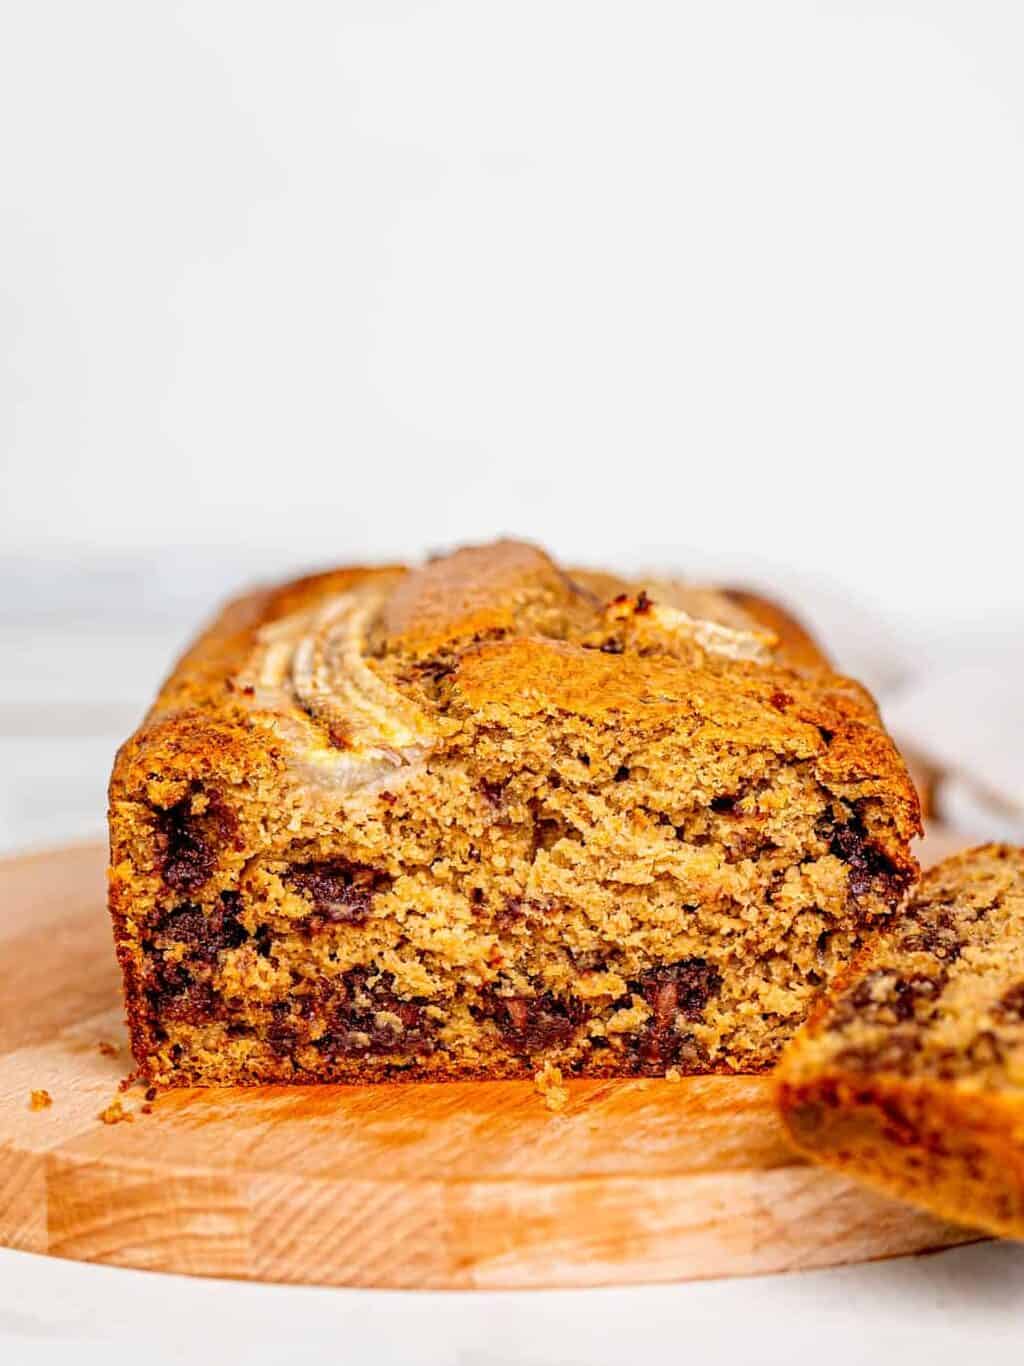 Fluffy Healthy Banana Bread with chocolate chips.